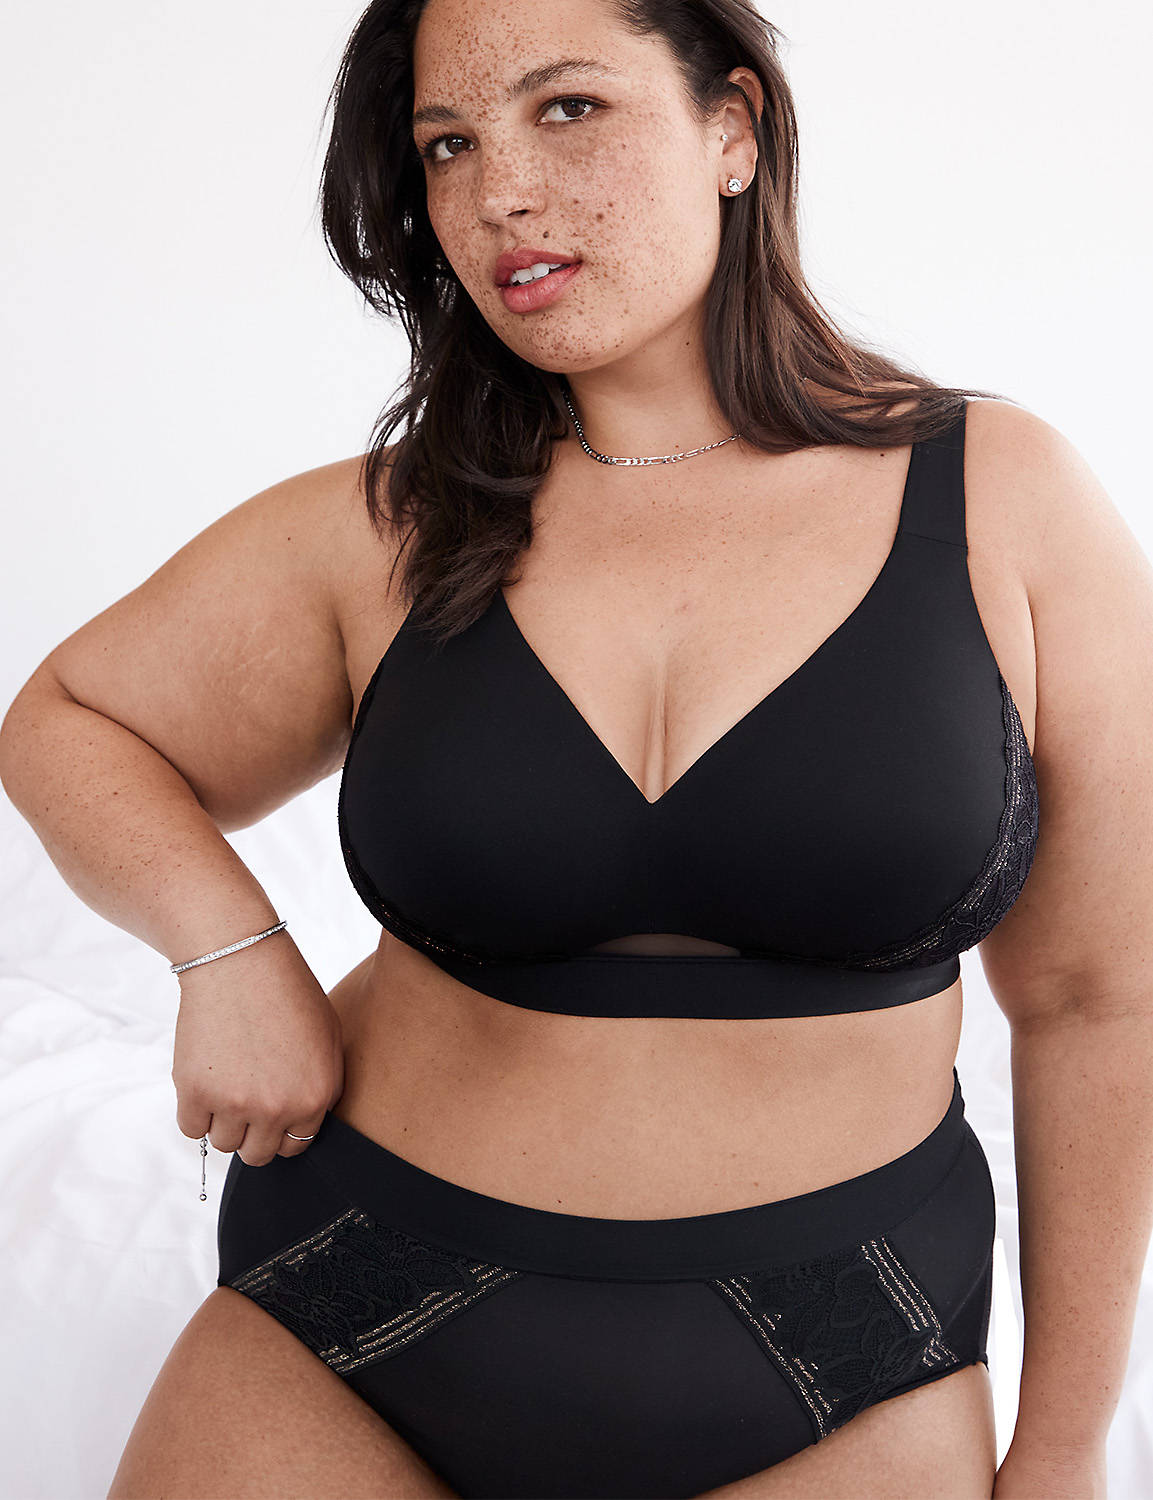 Lane Bryant - Tried our most-loved Comfort Bliss bras yet?